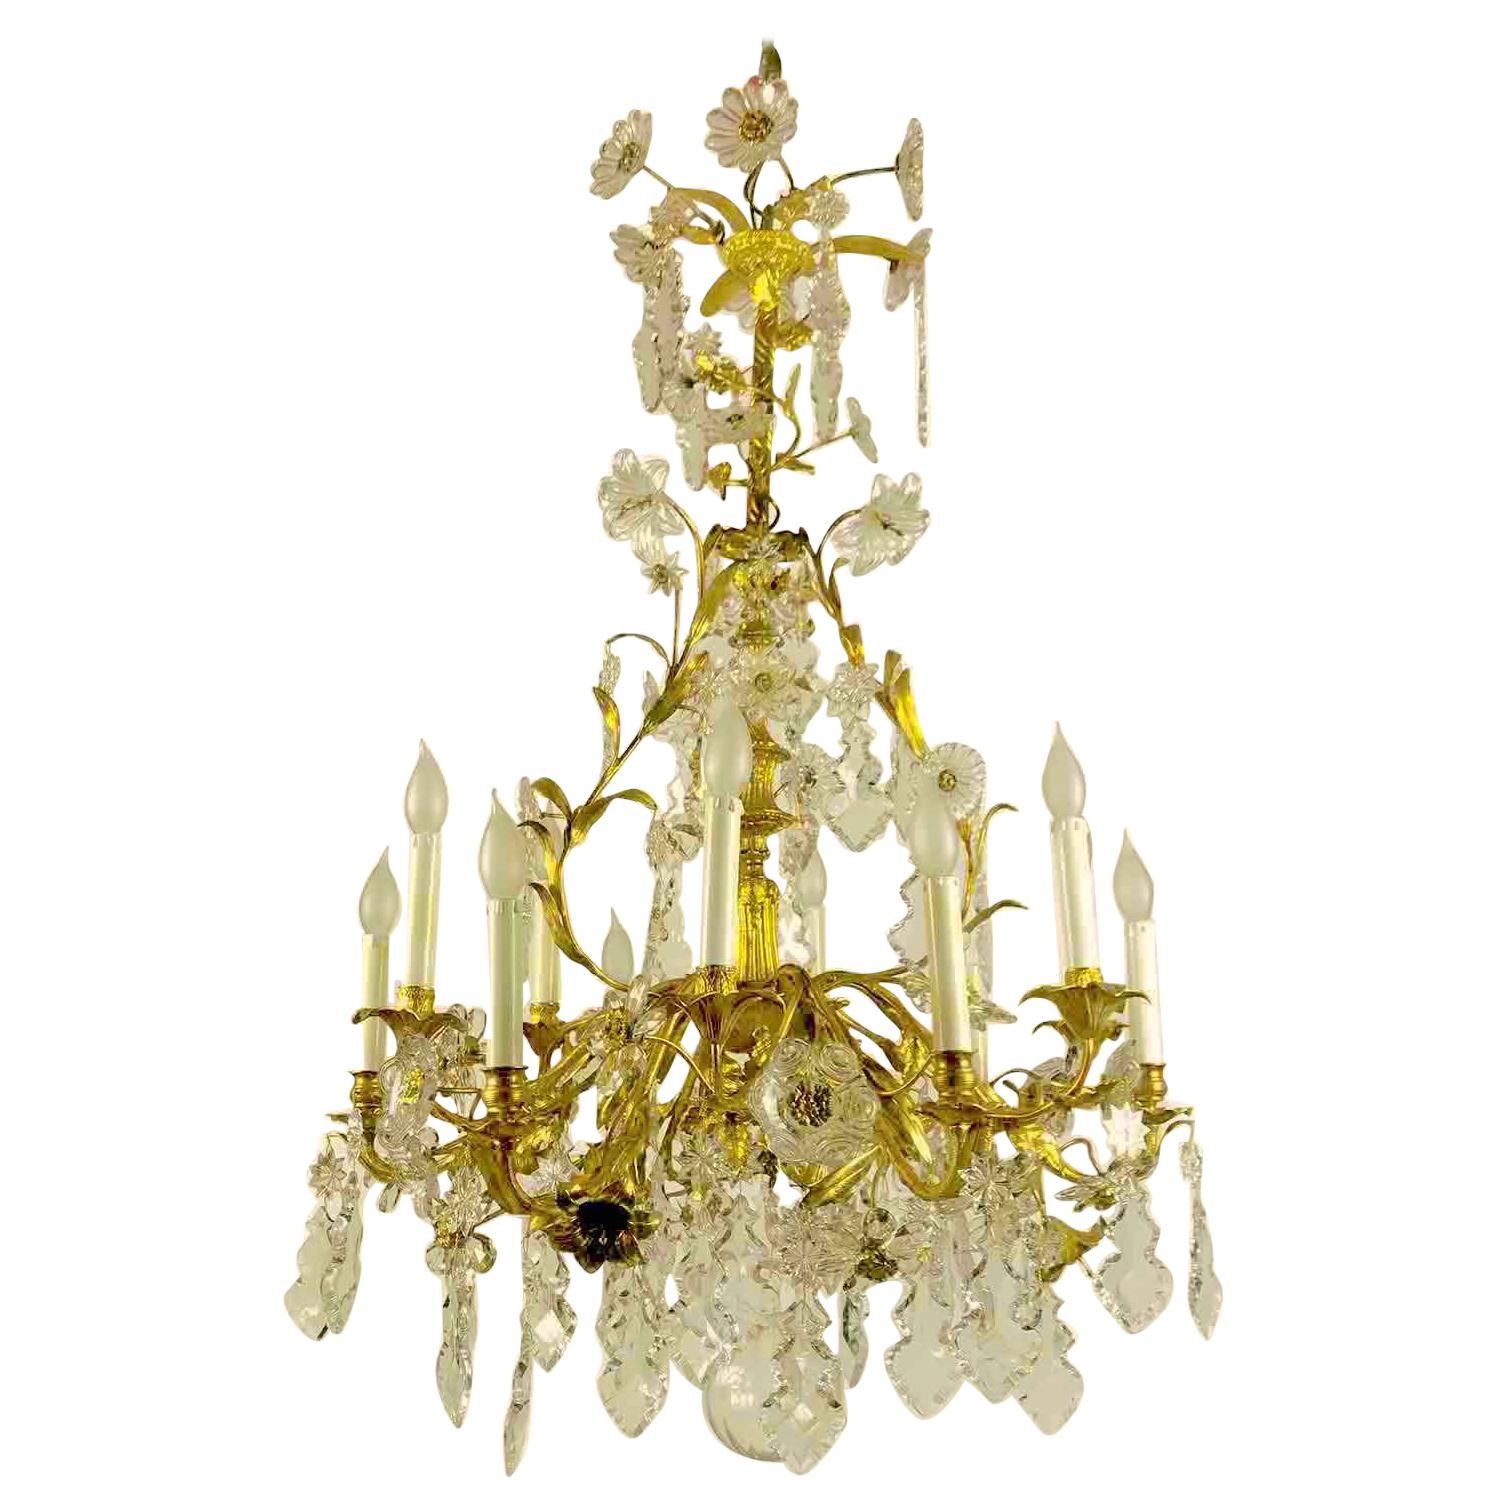 19th Century French Fire Gilt Bronze Crystal Twelve-Branch Floral Chandelier For Sale